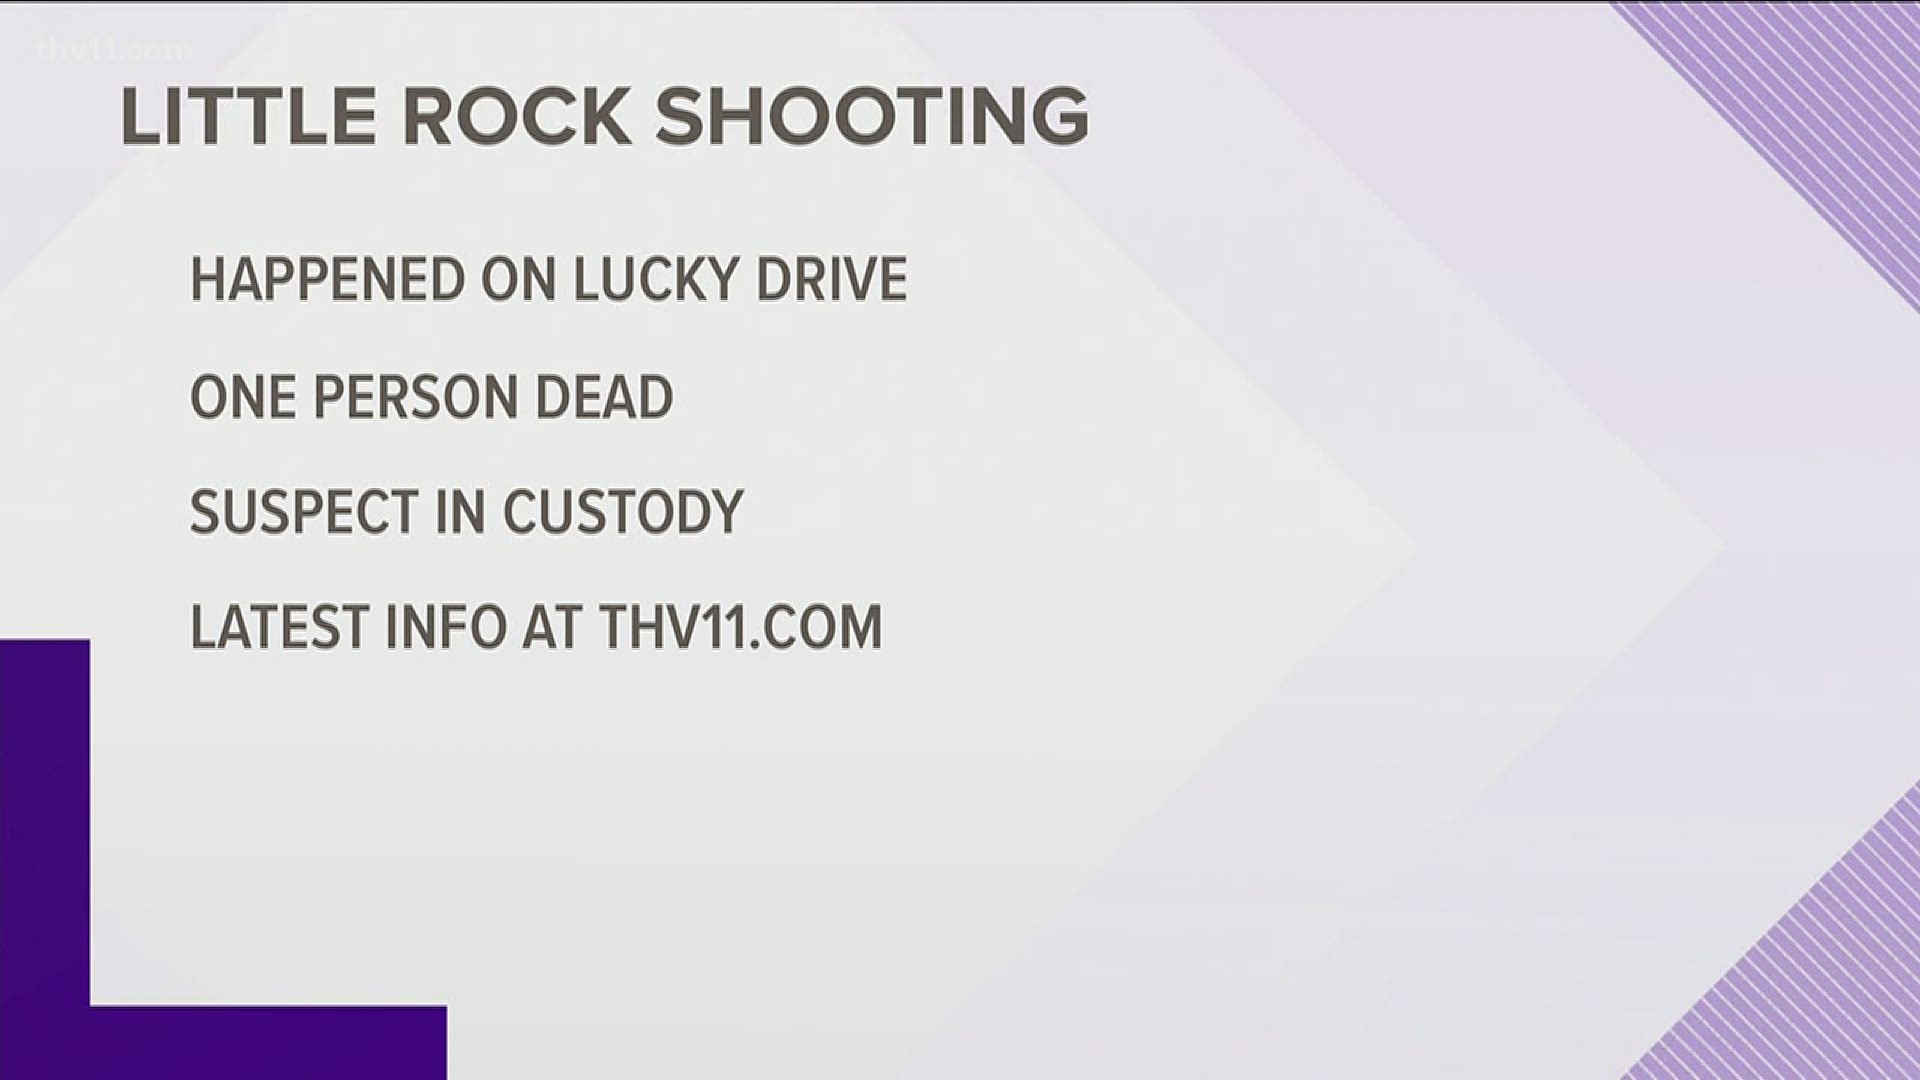 Police are investigating a shooting that left one dead on Lucky Drive.